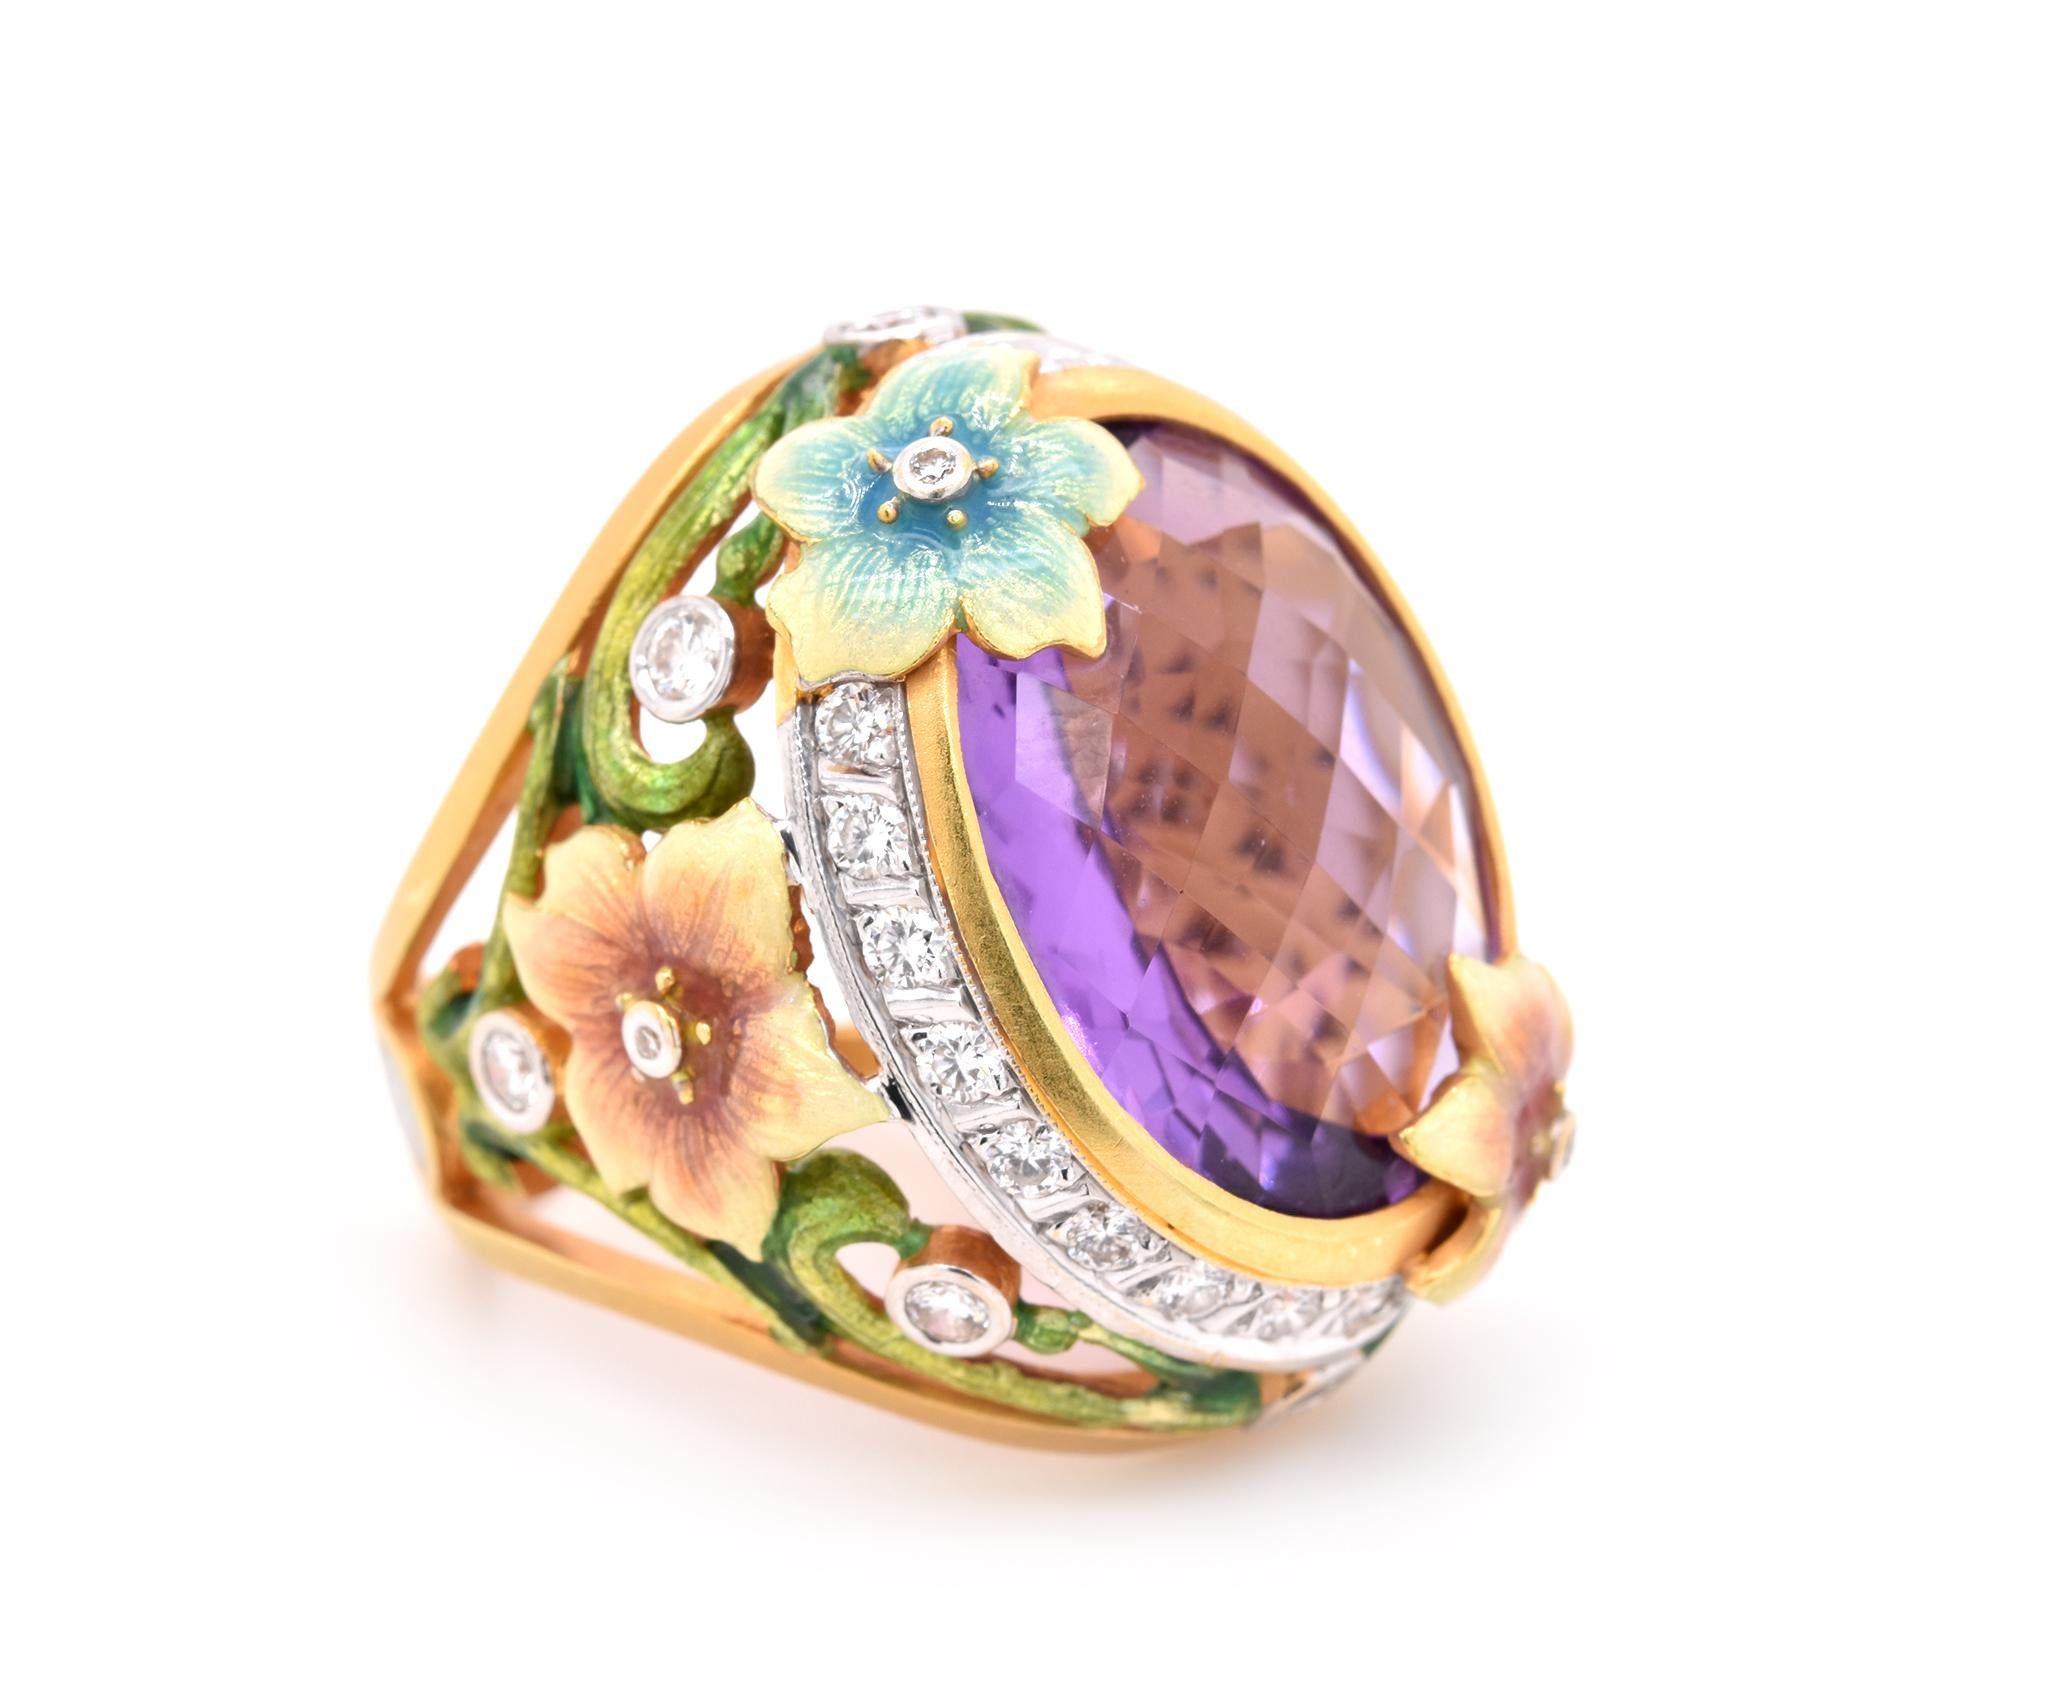 Designer: Masriera
Material: 18K yellow gold
Diamonds: 30 round brilliant cut = 1.00cttw
Color: G
Clarity: VS1
Amethyst: 1 oval cut = 14.82ct
Dimensions: ring top measures 27.7mm X 24mm
Size: 6.75
Weight: 19.22 grams
